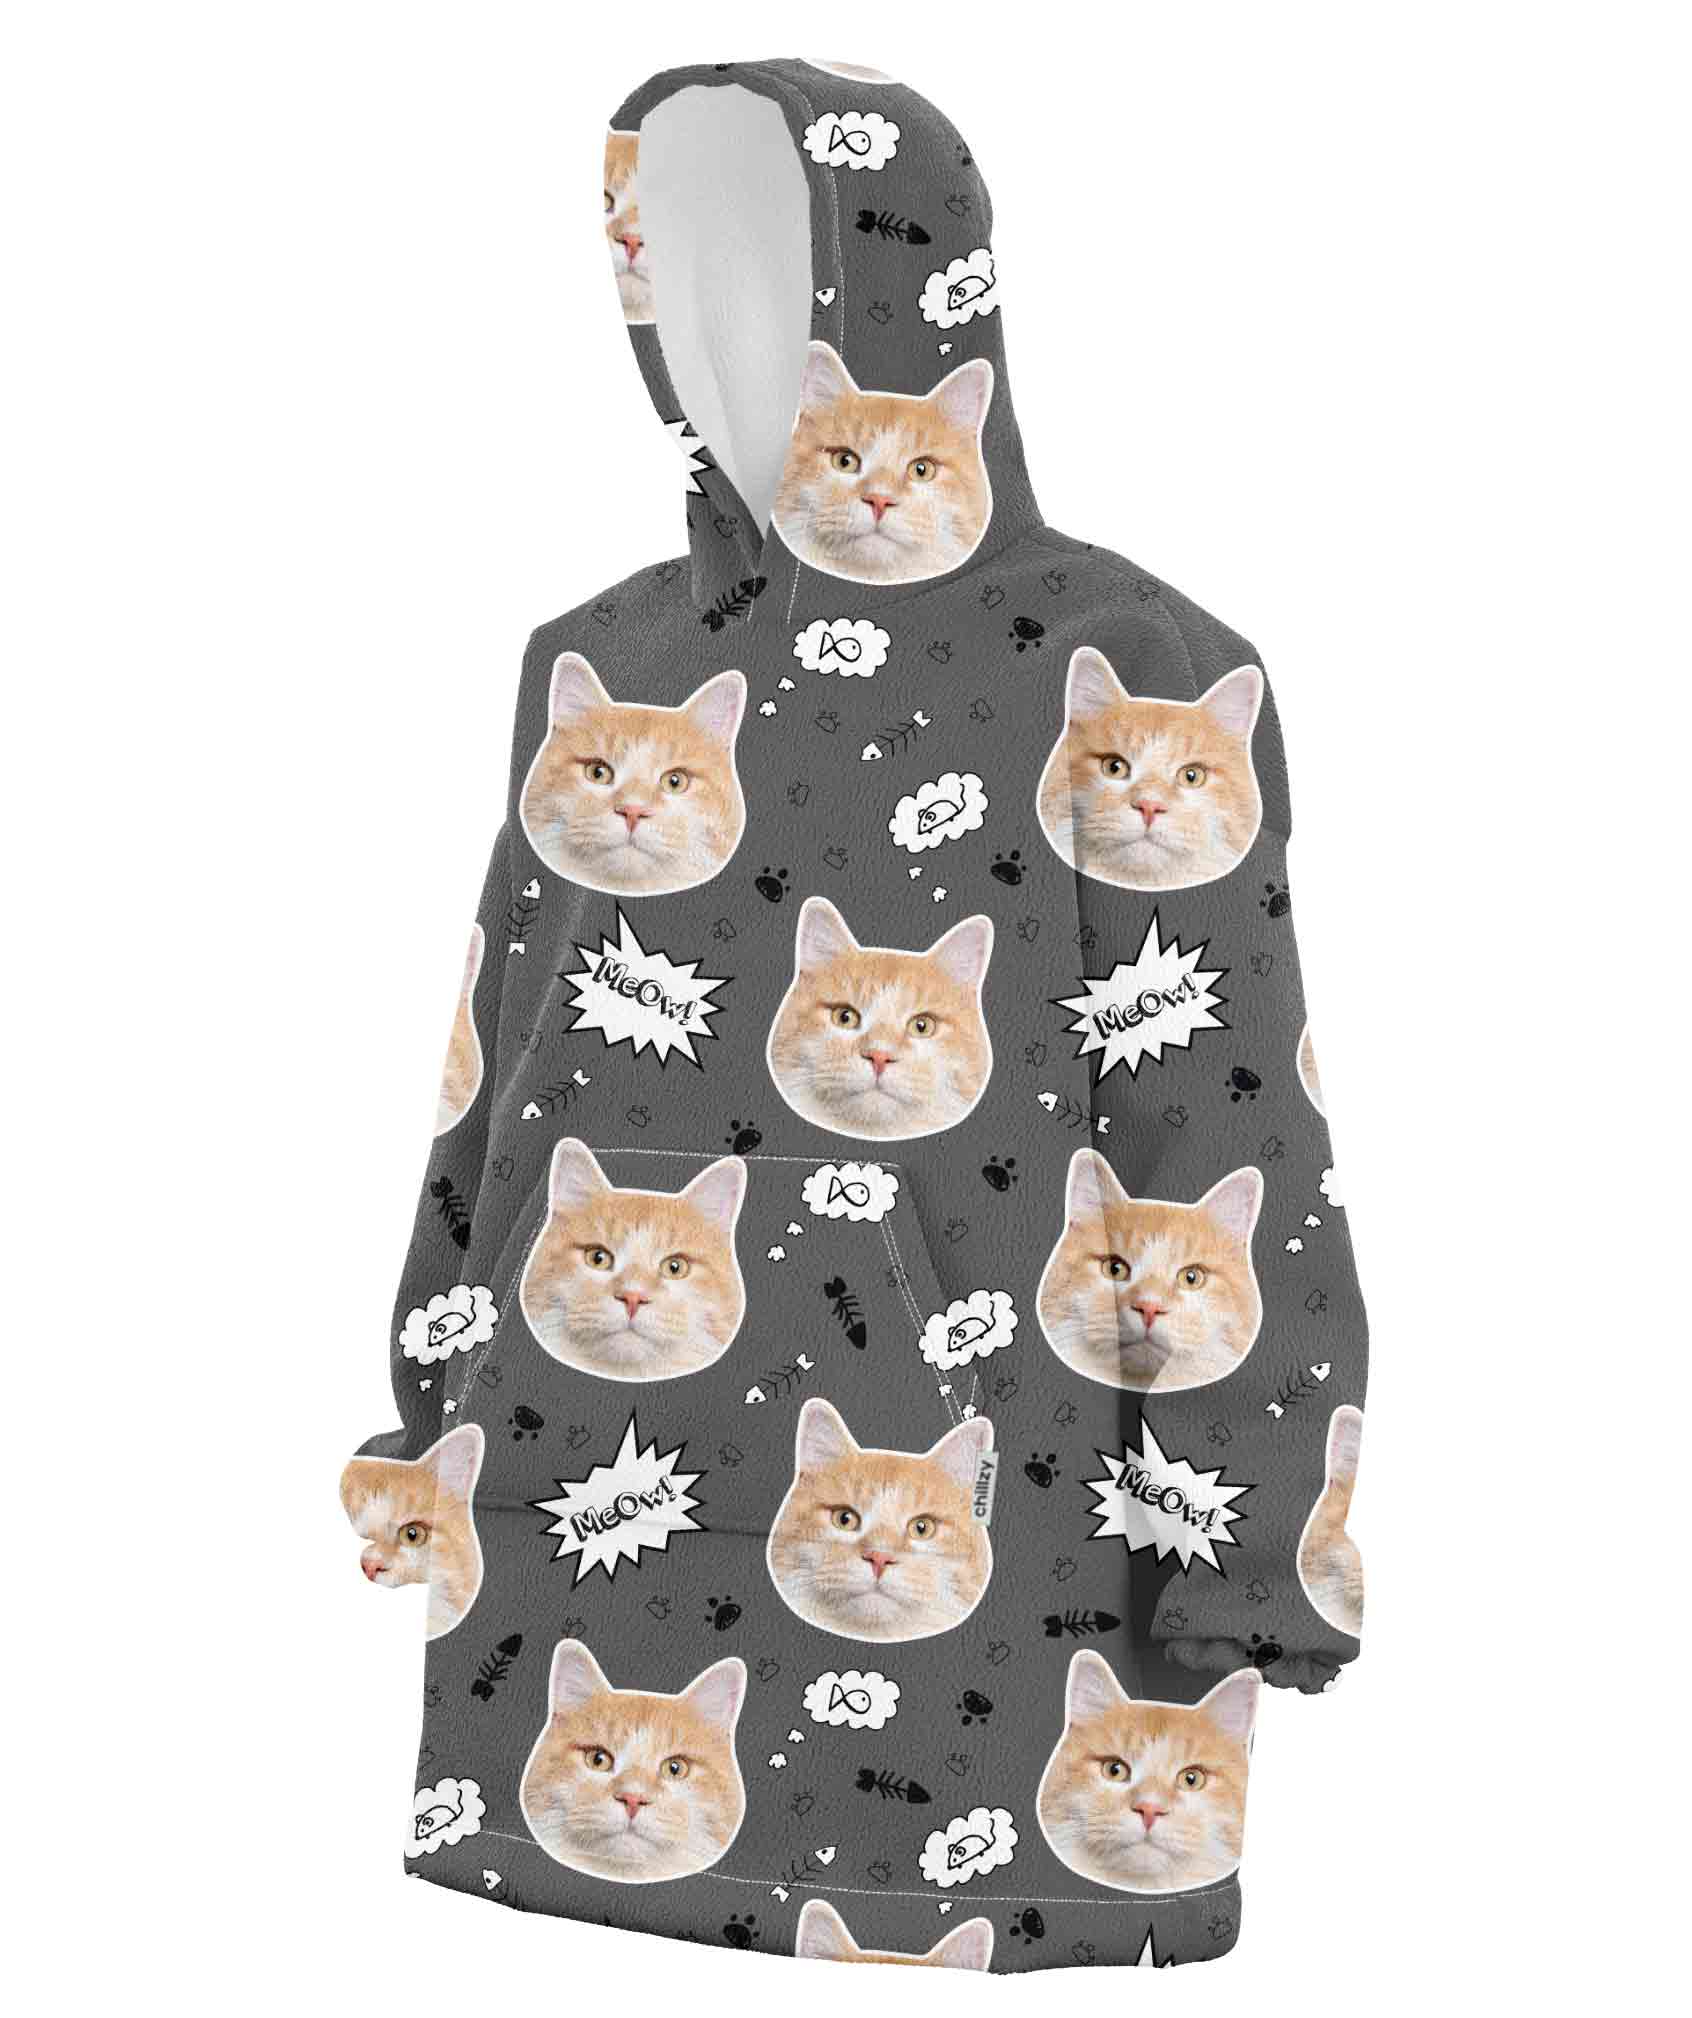 Your Cat Meow Chillzy Hoodie Blanket